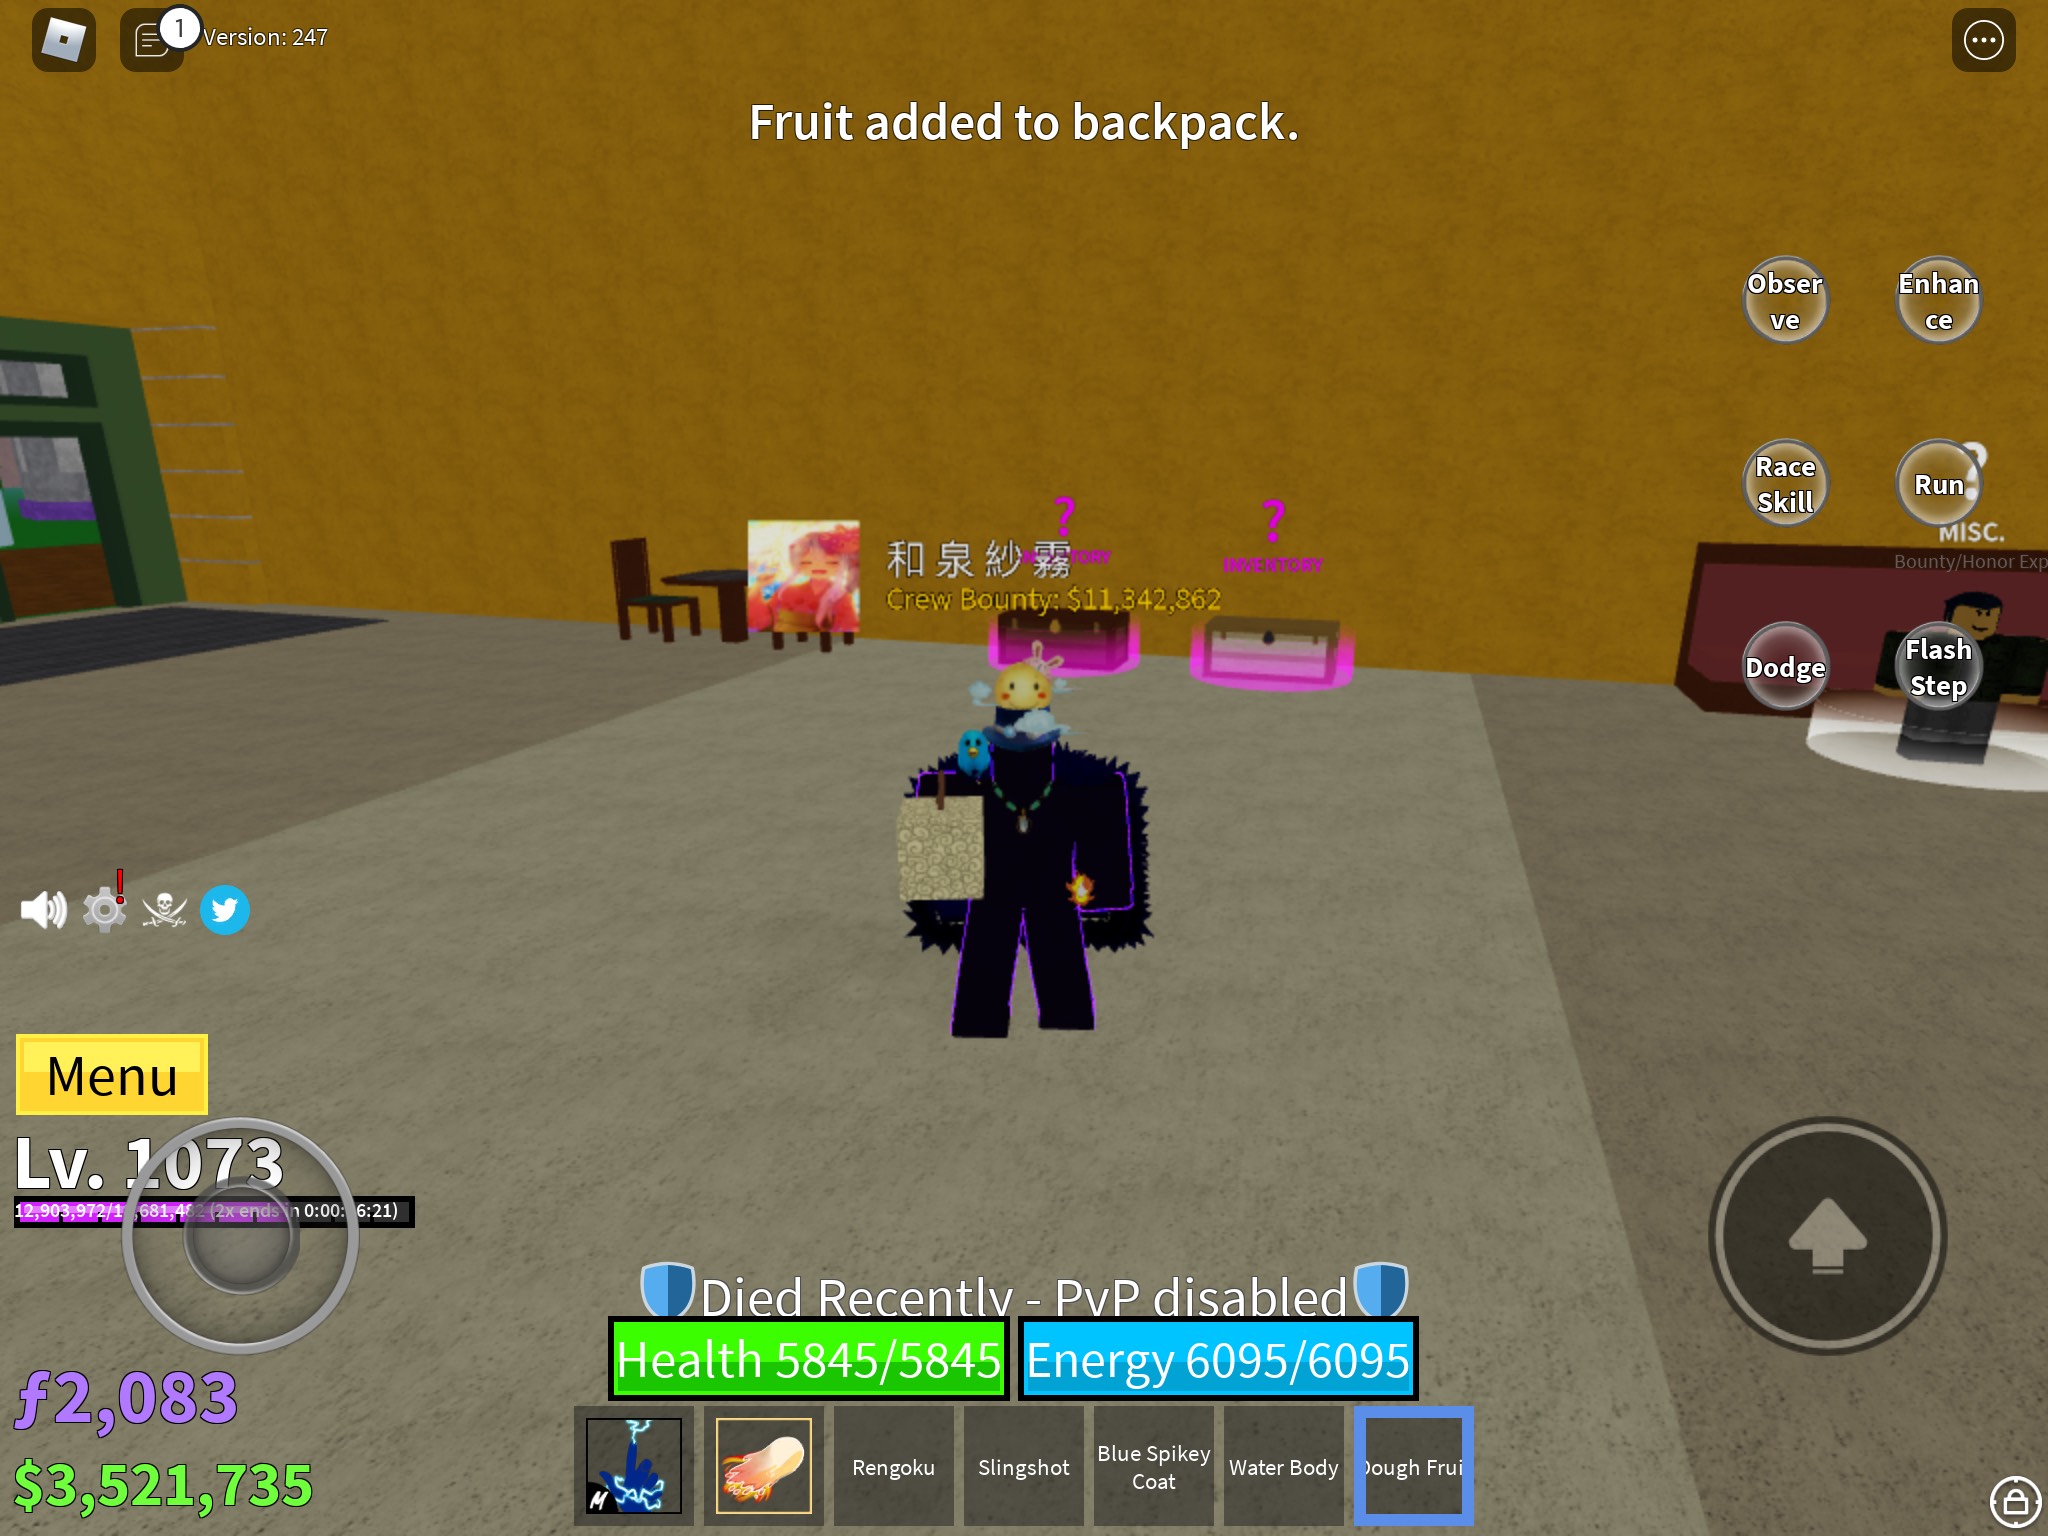 just a random picture of blox fruits i took (idk if this counts as